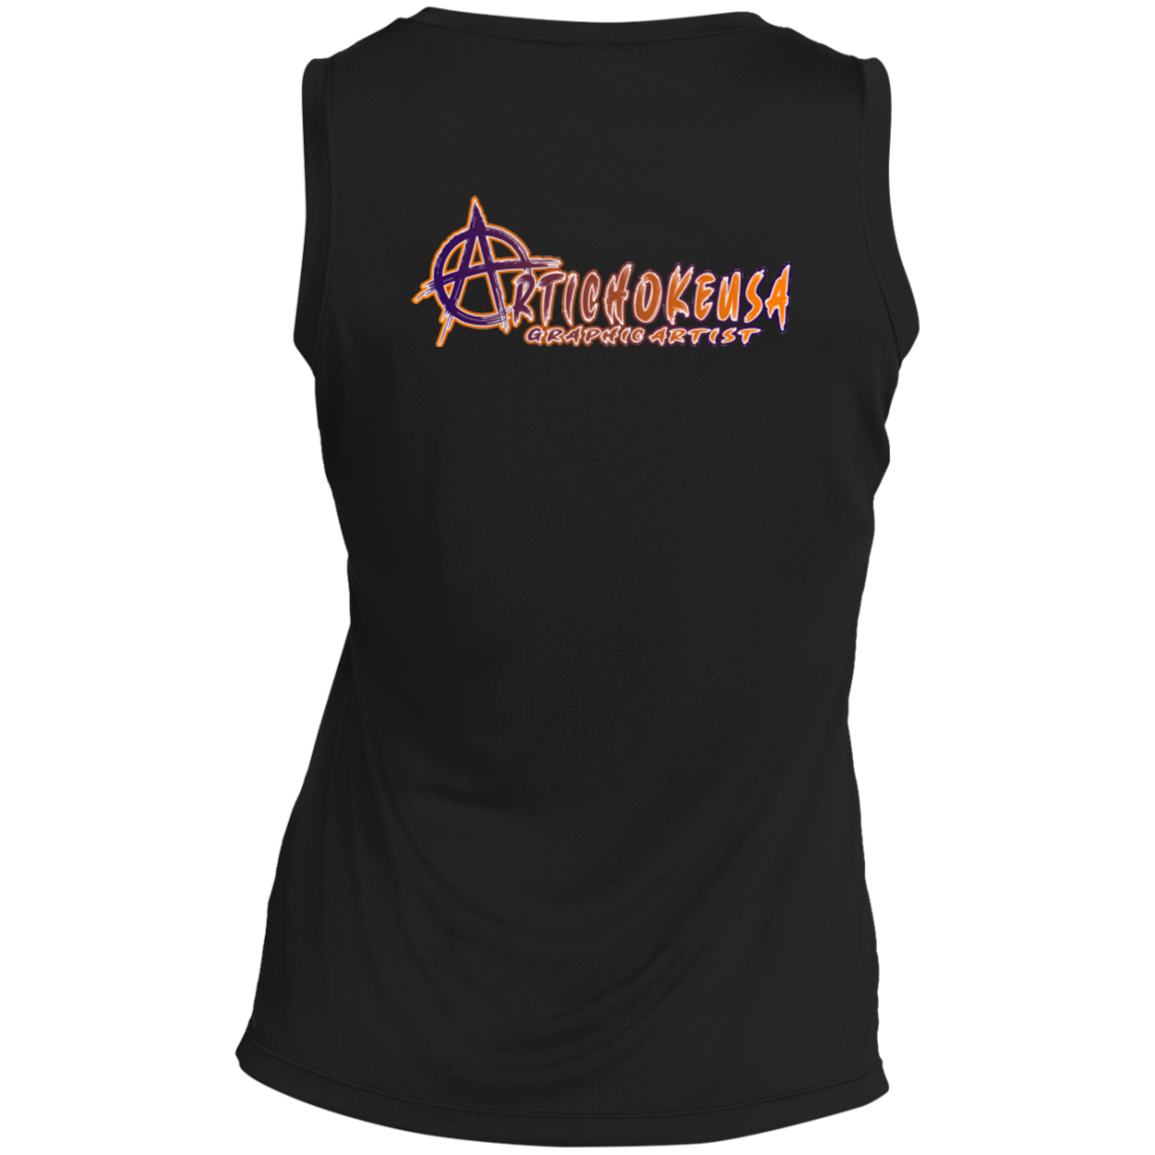 ArtichokeUSA Character and Font design. Let's Create Your Own Team Design Today. Arthur. Ladies' Sleeveless V-Neck